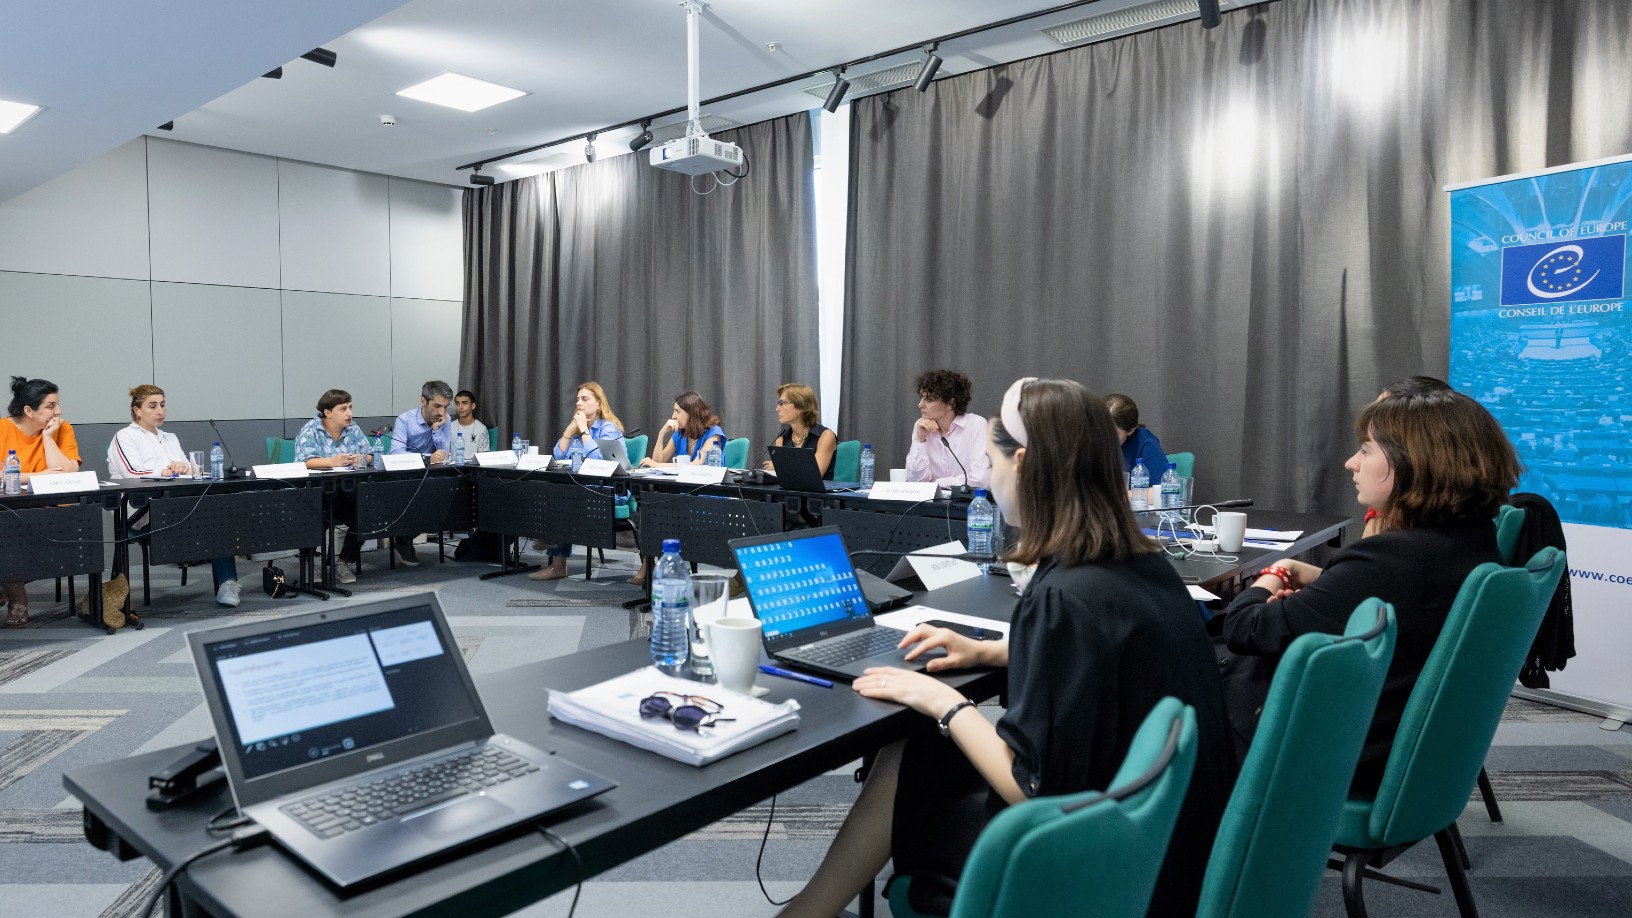 Council of the Georgian Charter of Journalistic Ethics agreed on the changes aimed at institutional reform during the roundtable held in Tbilisi